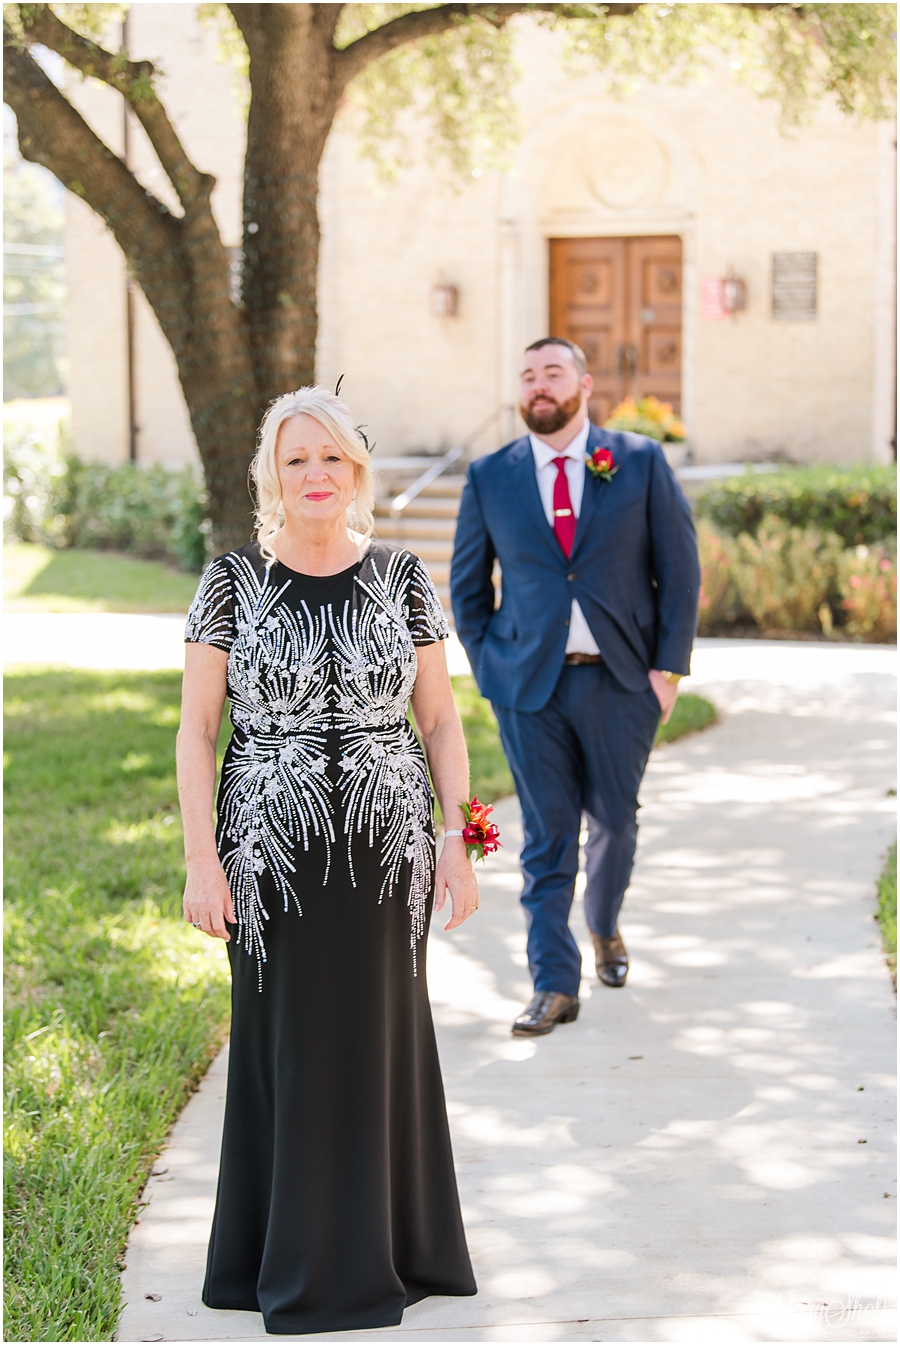 MaggShots Photography, DFW Wedding Photographer, Belo Mansion, Wedding Photographer, Belo Mansion, Wedding Photographer, Dallas wedding, Belo Mansion Wedding, Trinity Groves Engagement, Klyde Warren Park Engagement, Trinity Groves Photographyer, groom, first look